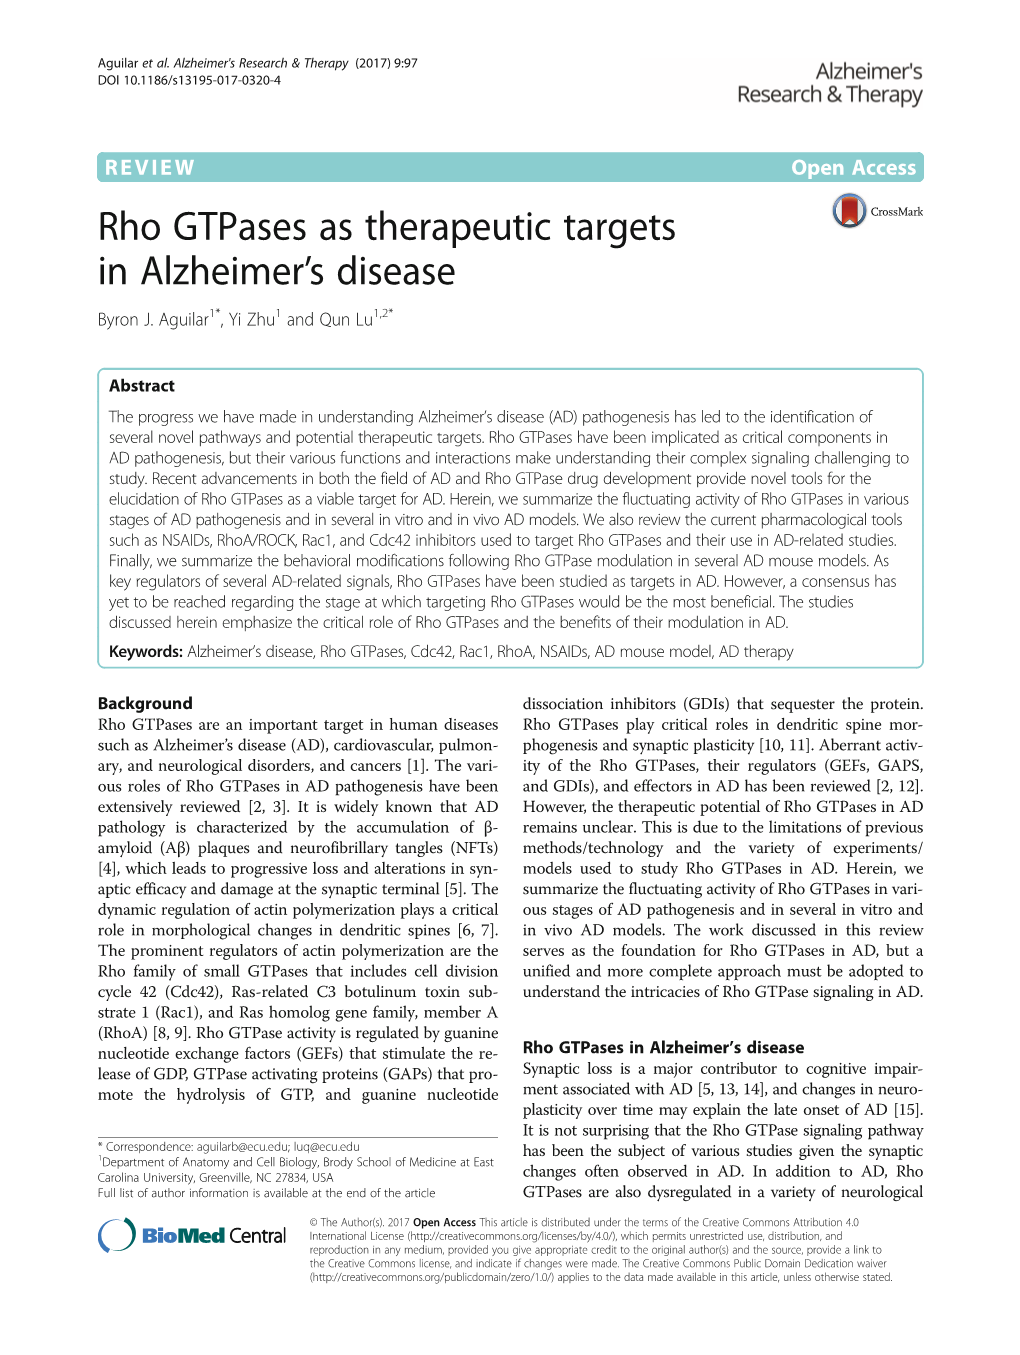 Rho Gtpases As Therapeutic Targets in Alzheimer's Disease